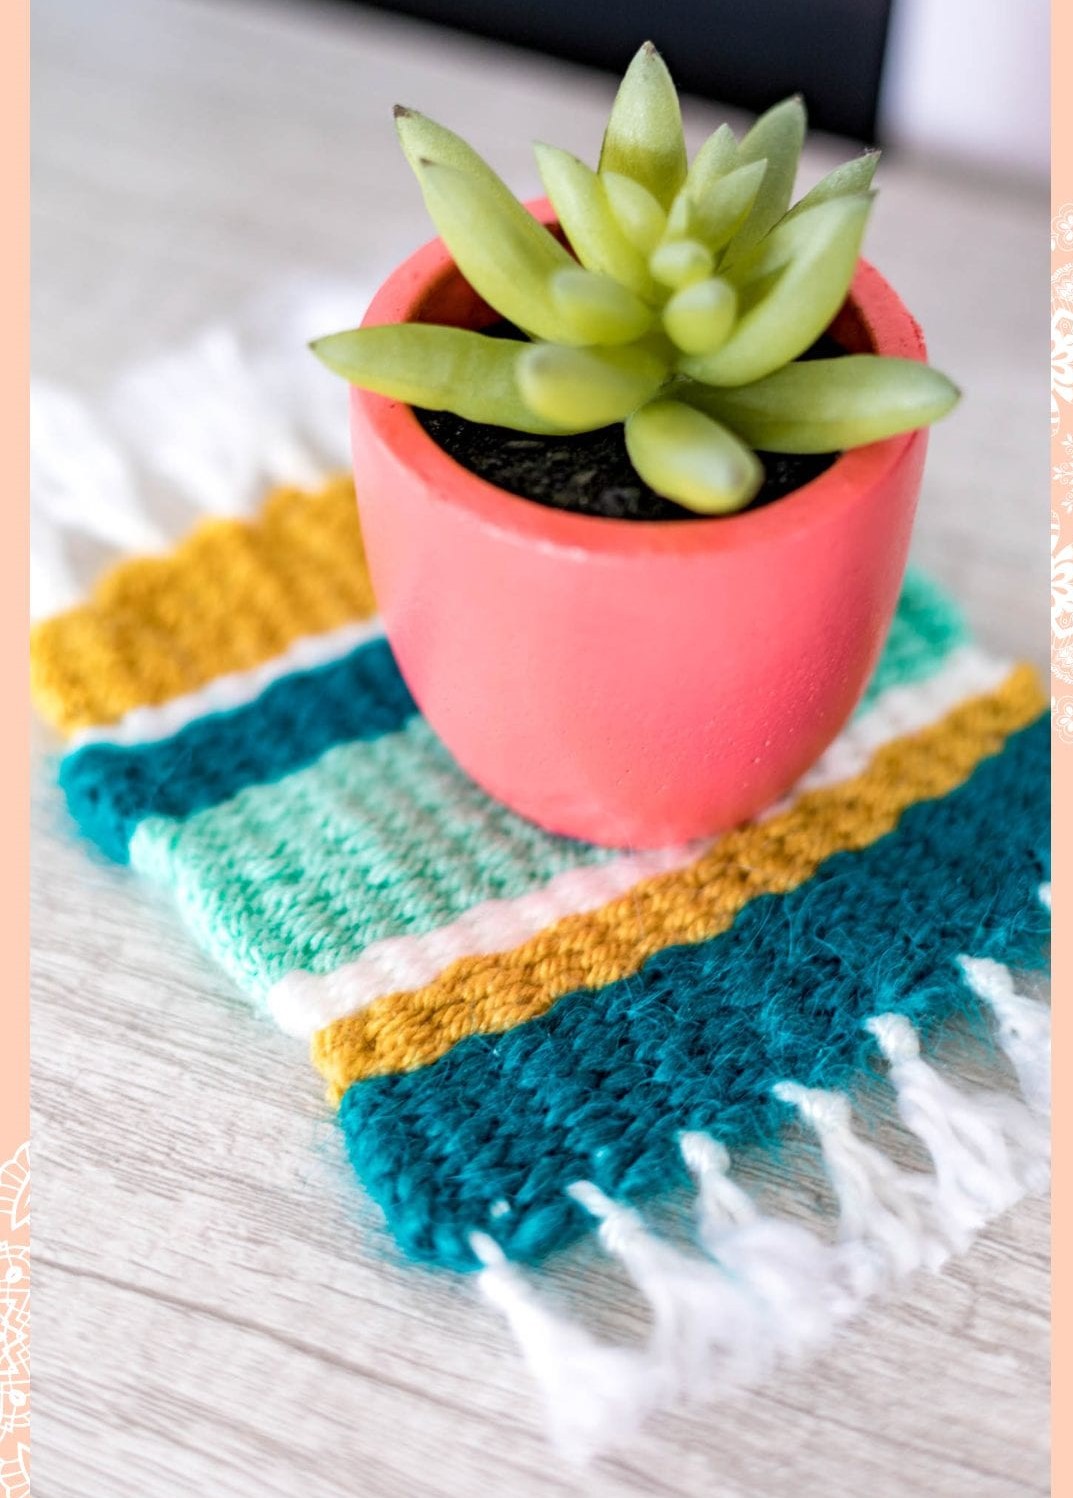 Woven multi-colored mug rug with a plant pot on it